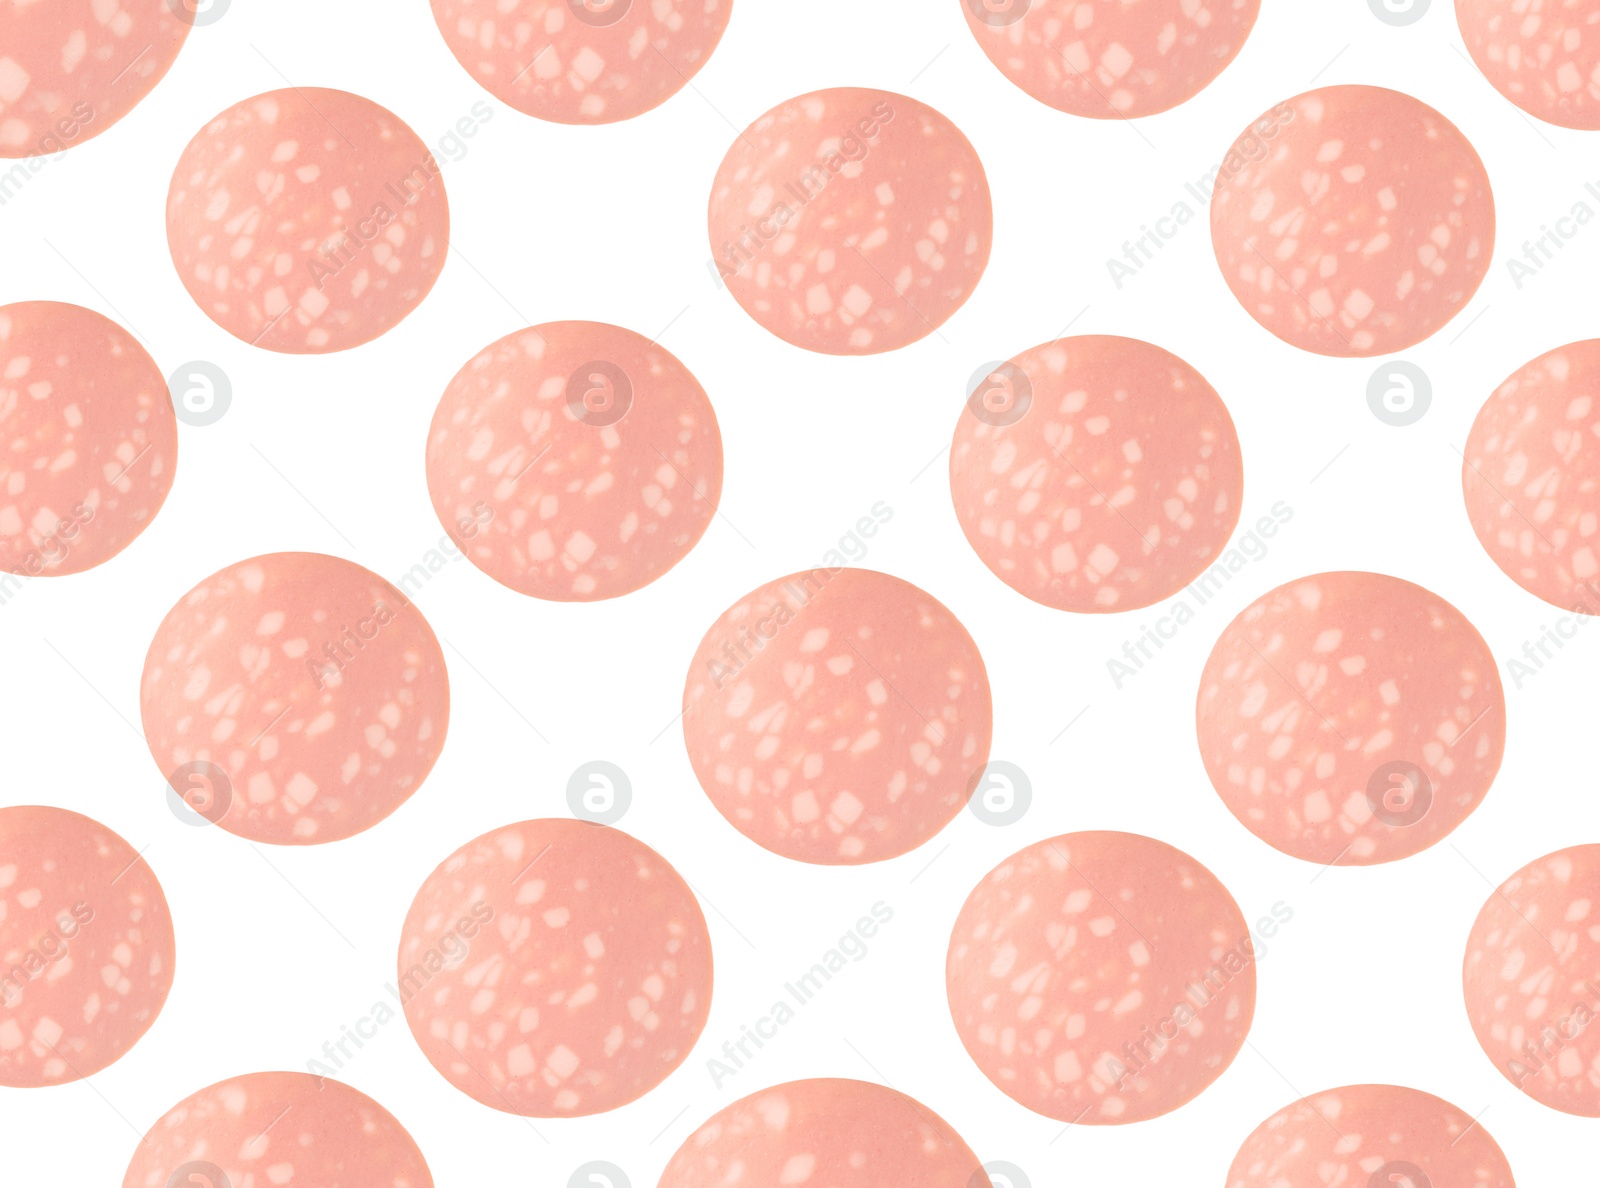 Image of Slices of tasty boiled sausage on white background